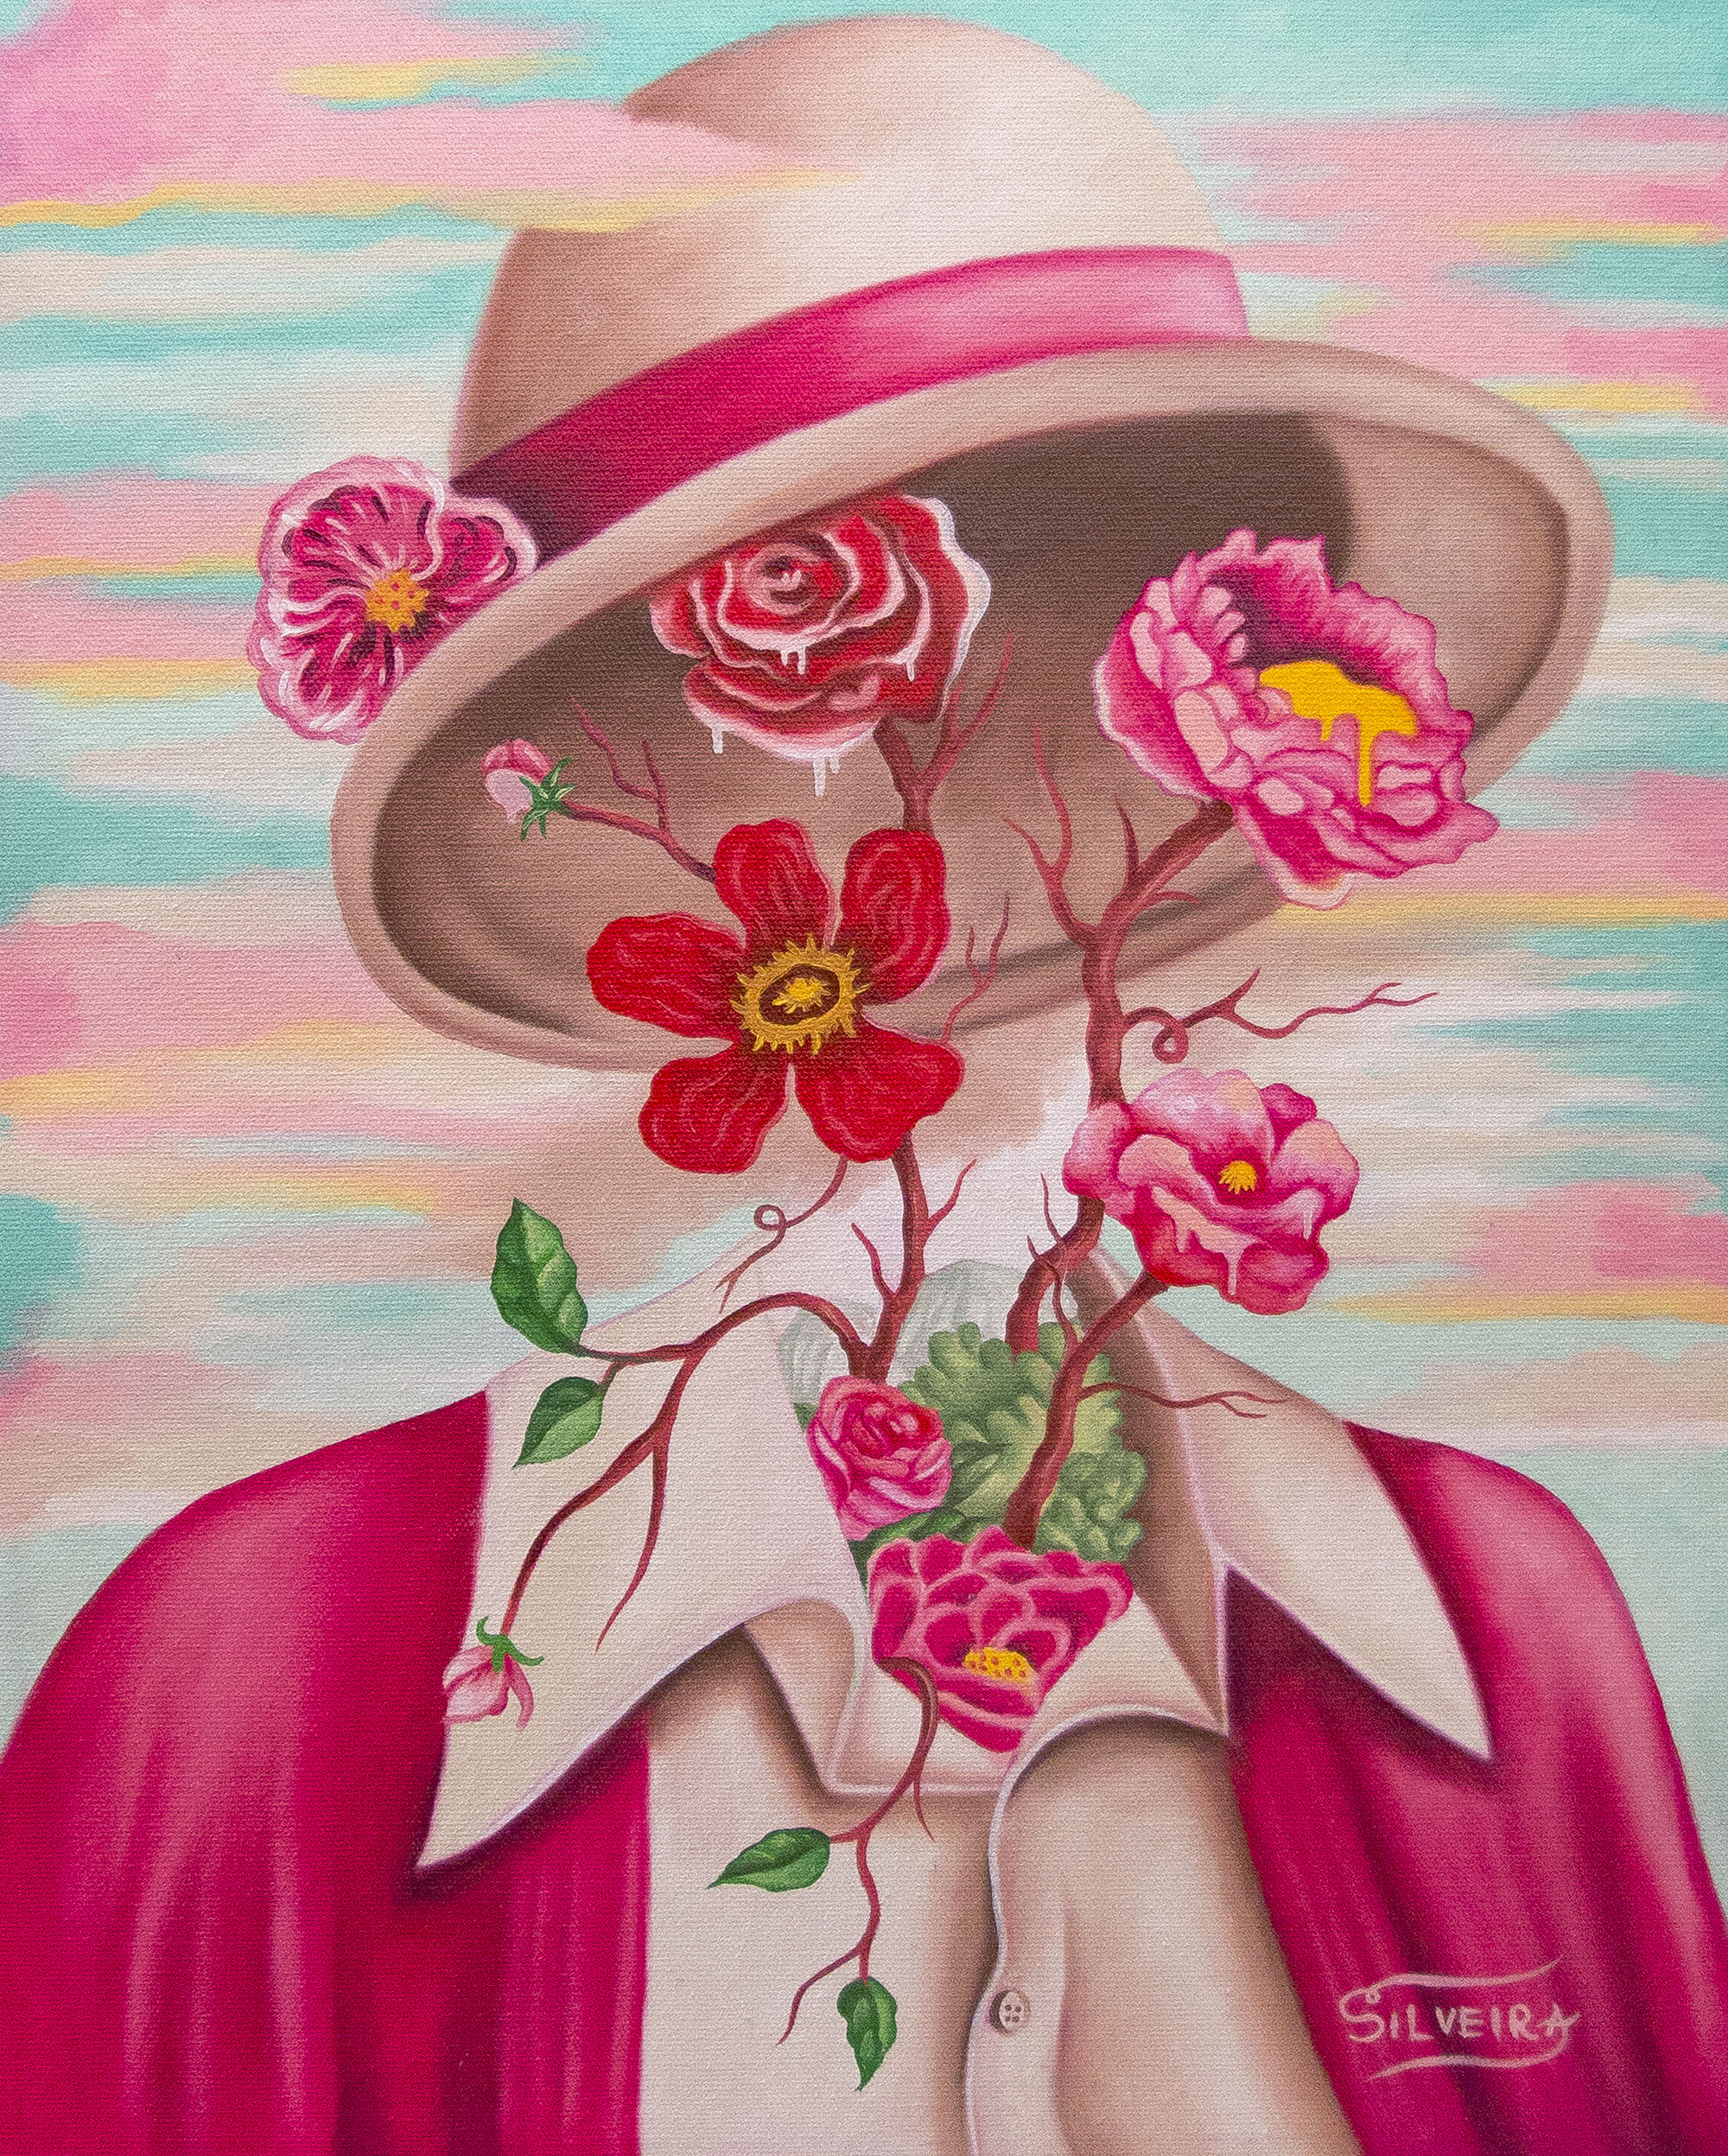 A vibrant and colorful portrait of a figure without a head, but instead pink and red flwoers growing upwards from the body, and a hat on top.